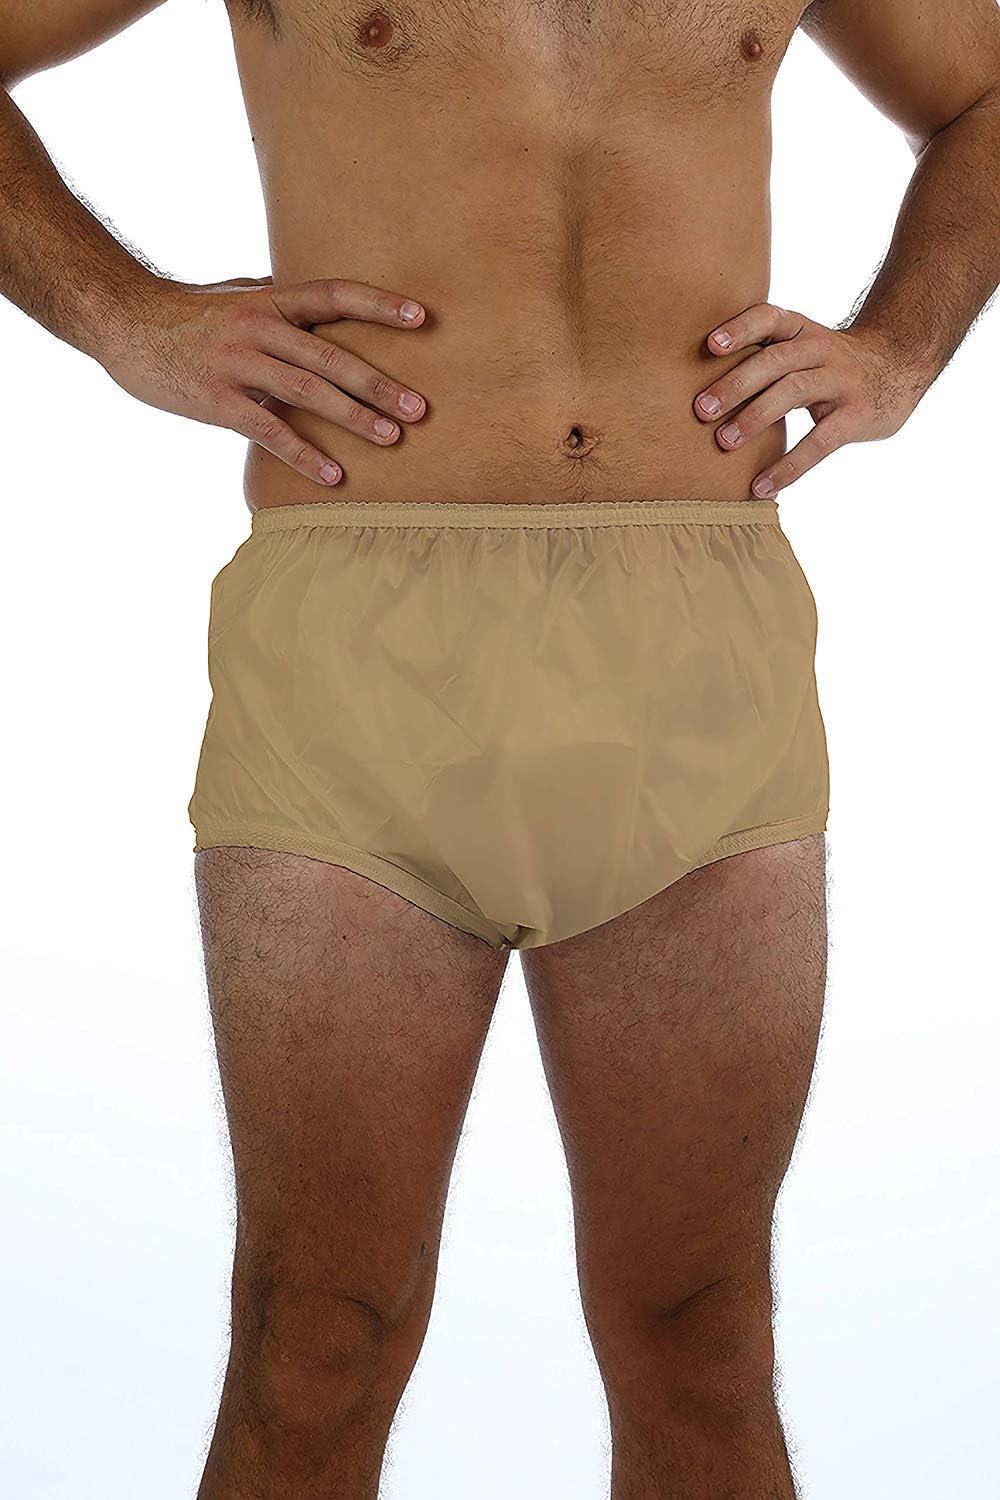 Adult Incontinence Pull-on Plastic Pants/Pull-on Diapers/Leak-Proof  Incontinence Underwear/Waterproof Adult Diaper Covers/Washable Men's and  Women's